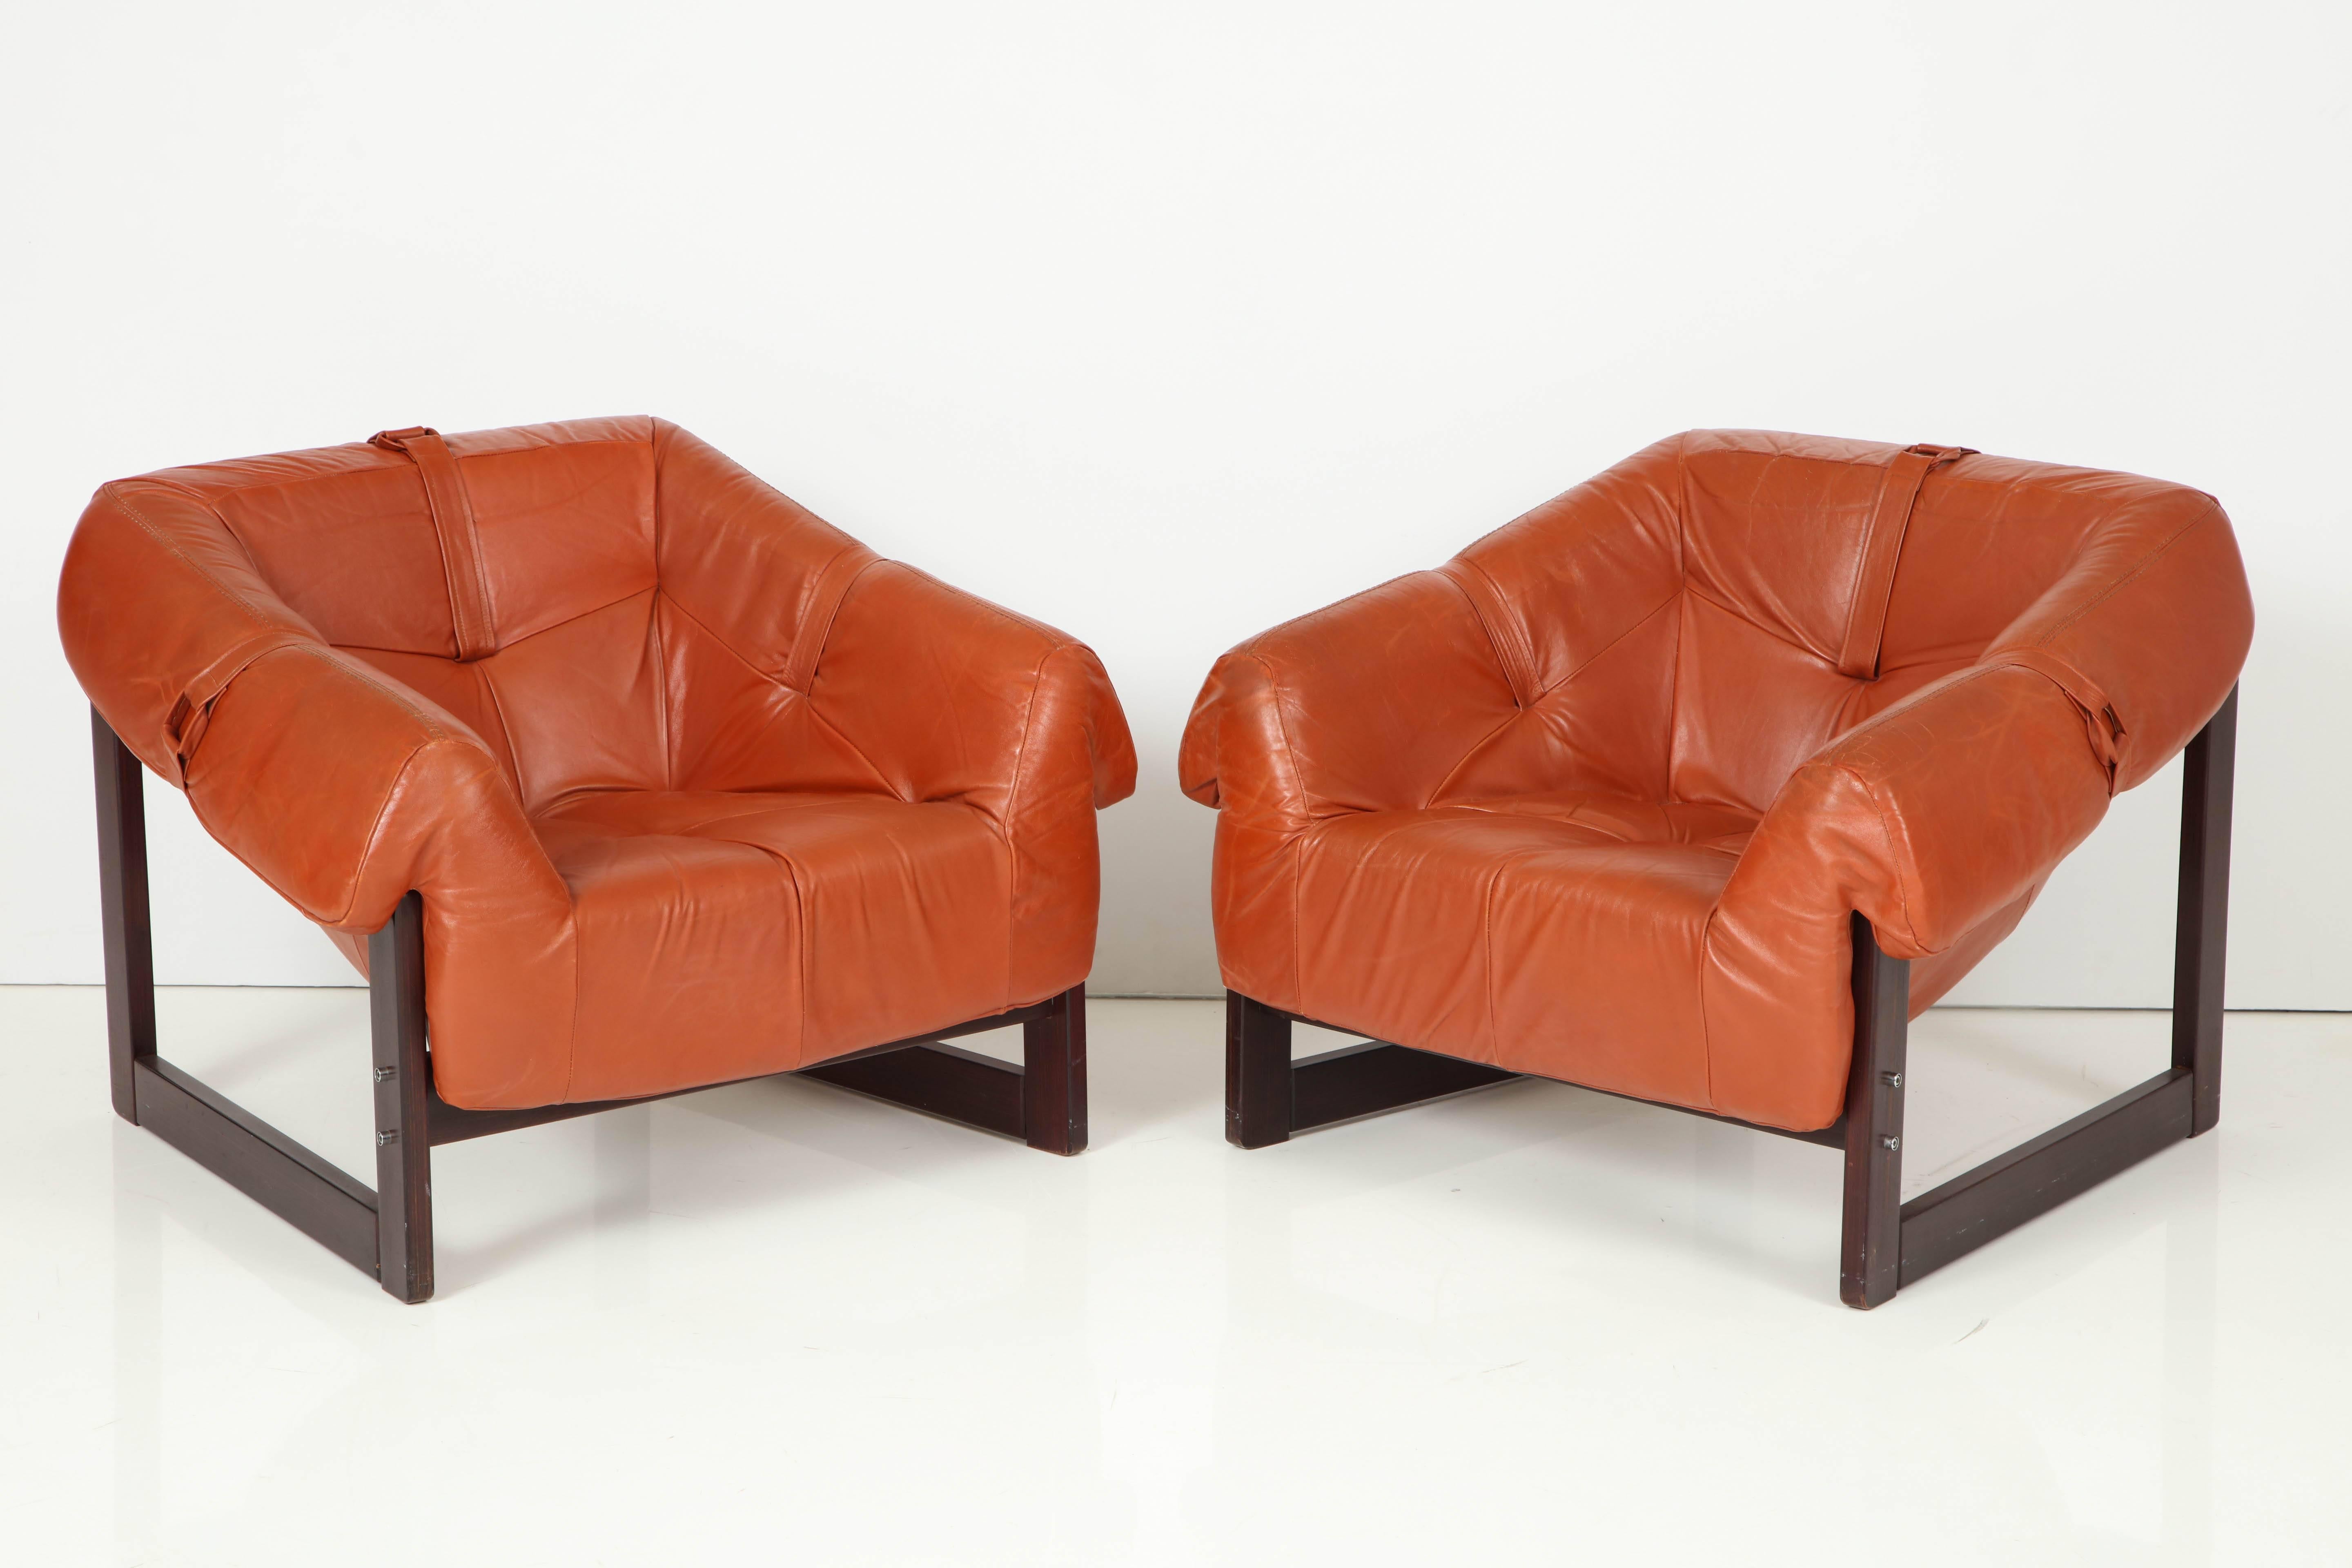 An all original pair of MP-091 loungers by Percival Lafer in Brazilian cherry and completely original caramel colored leather with original arm holding straps.